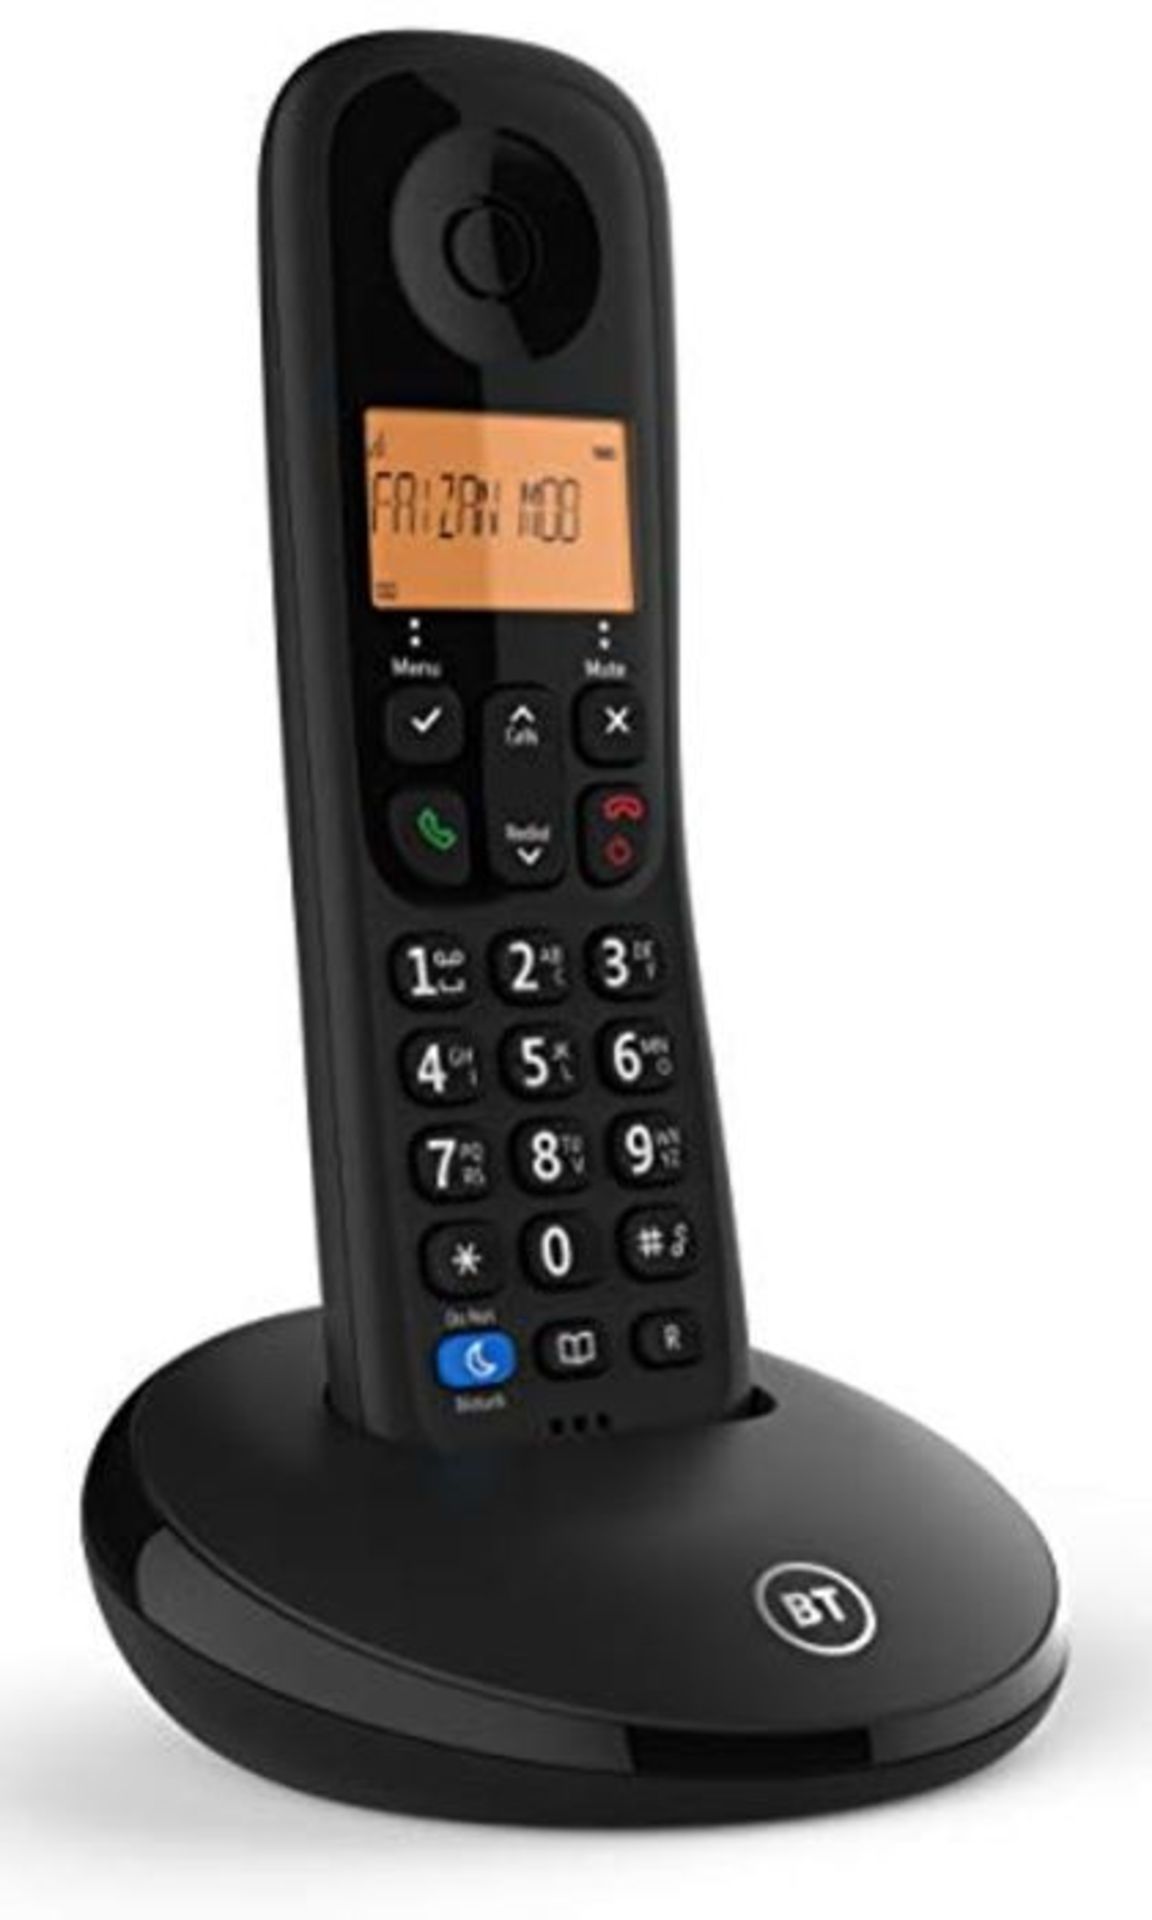 BT Everyday Cordless Home Phone with Basic Call Blocking, Single Handset Pack, Black - Image 3 of 4